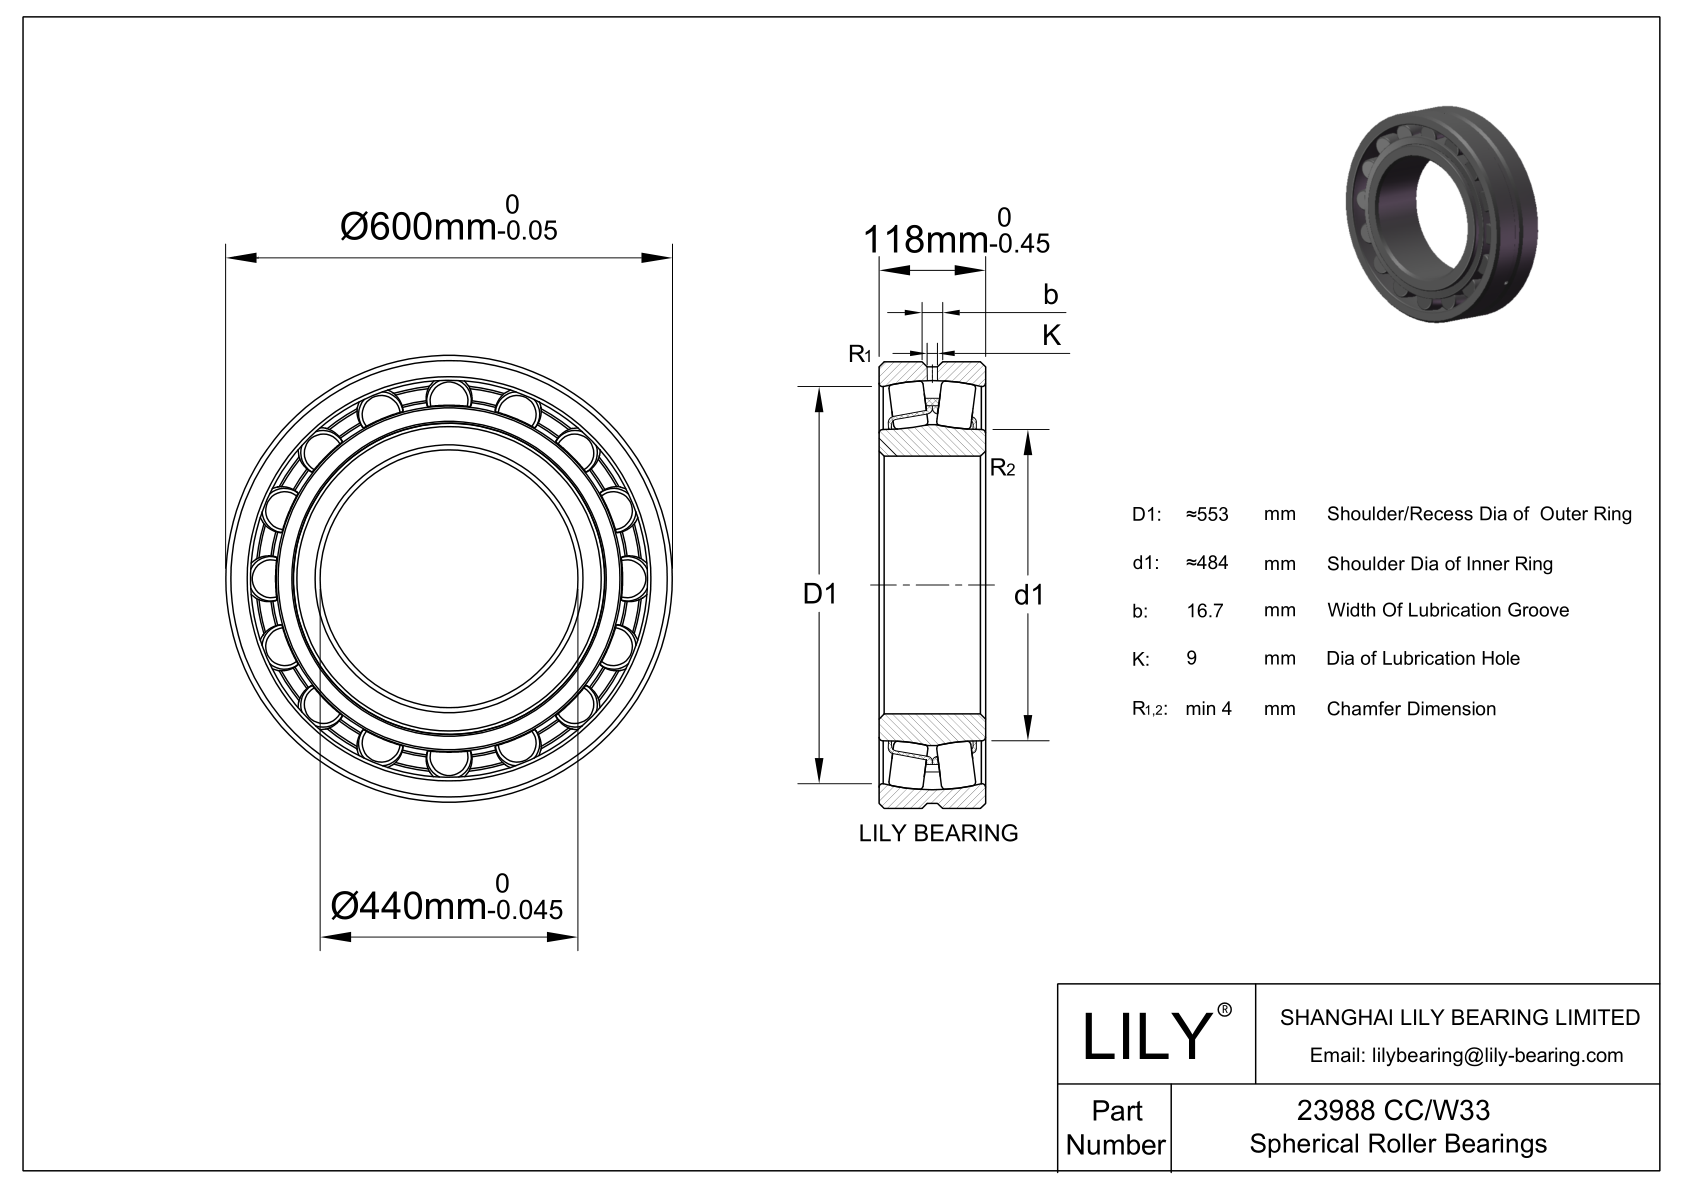 23988 CC/W33 Double Row Spherical Roller Bearing cad drawing